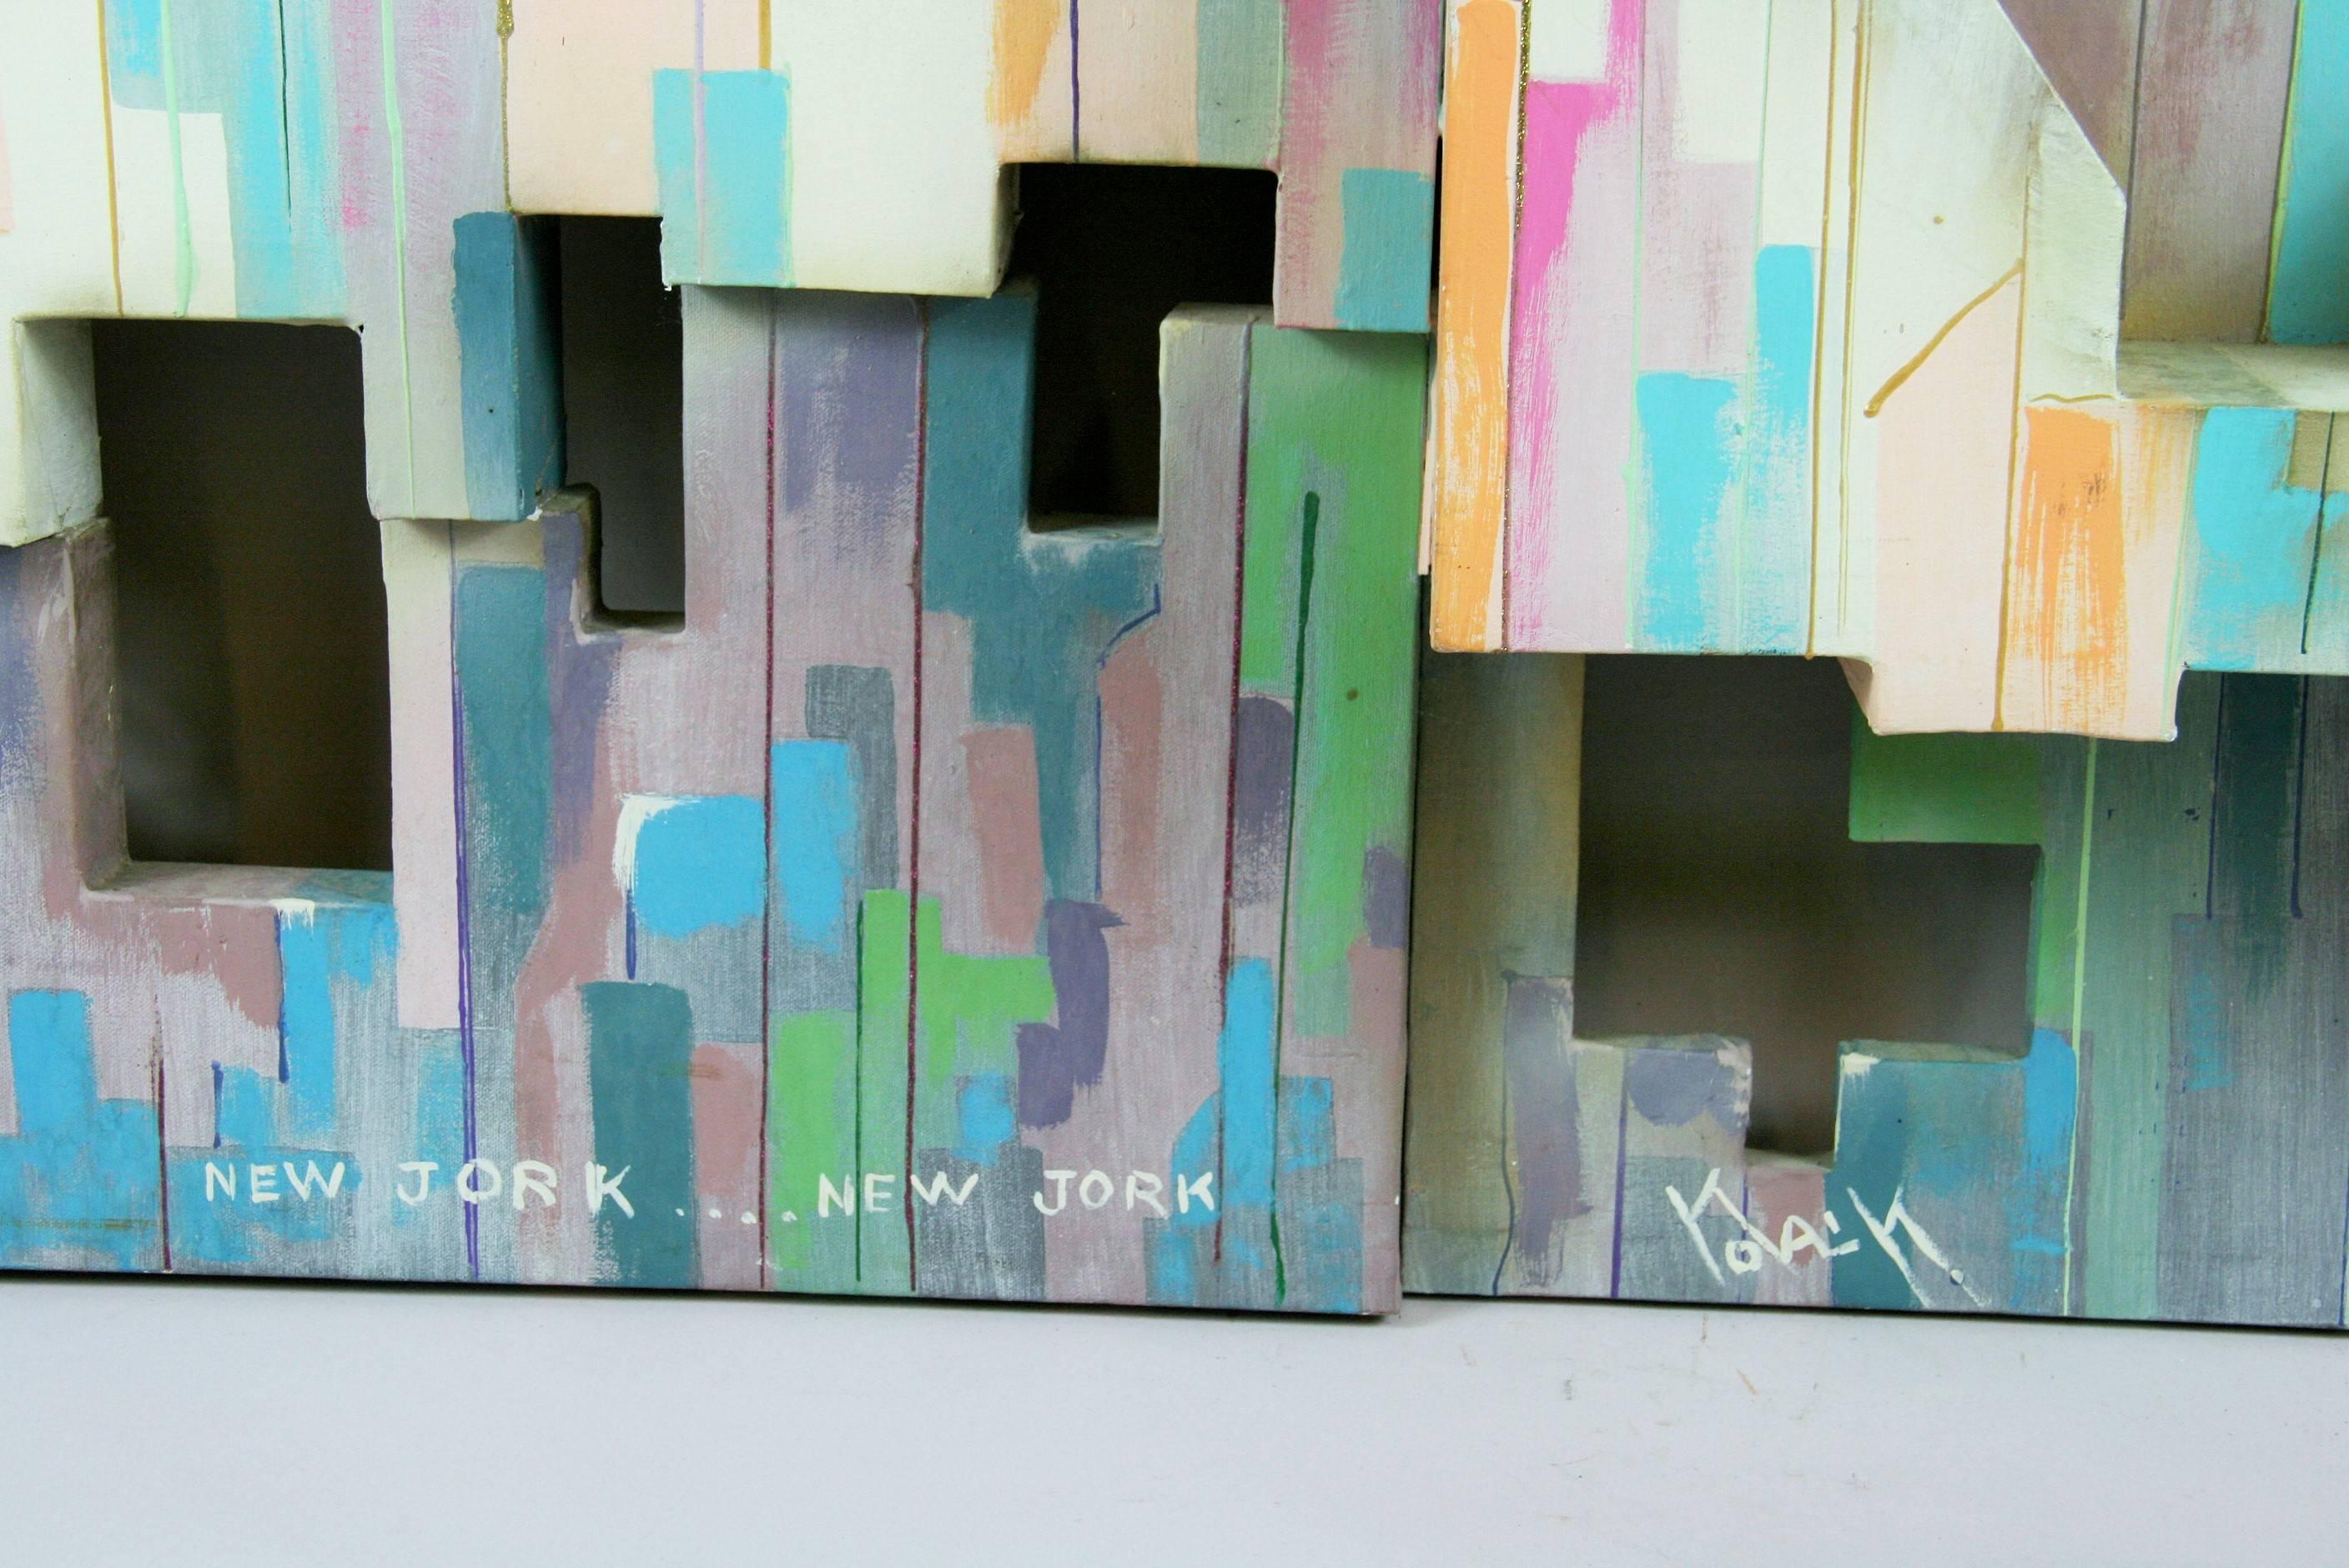  NYC Sculptural Painting by Yolay 2